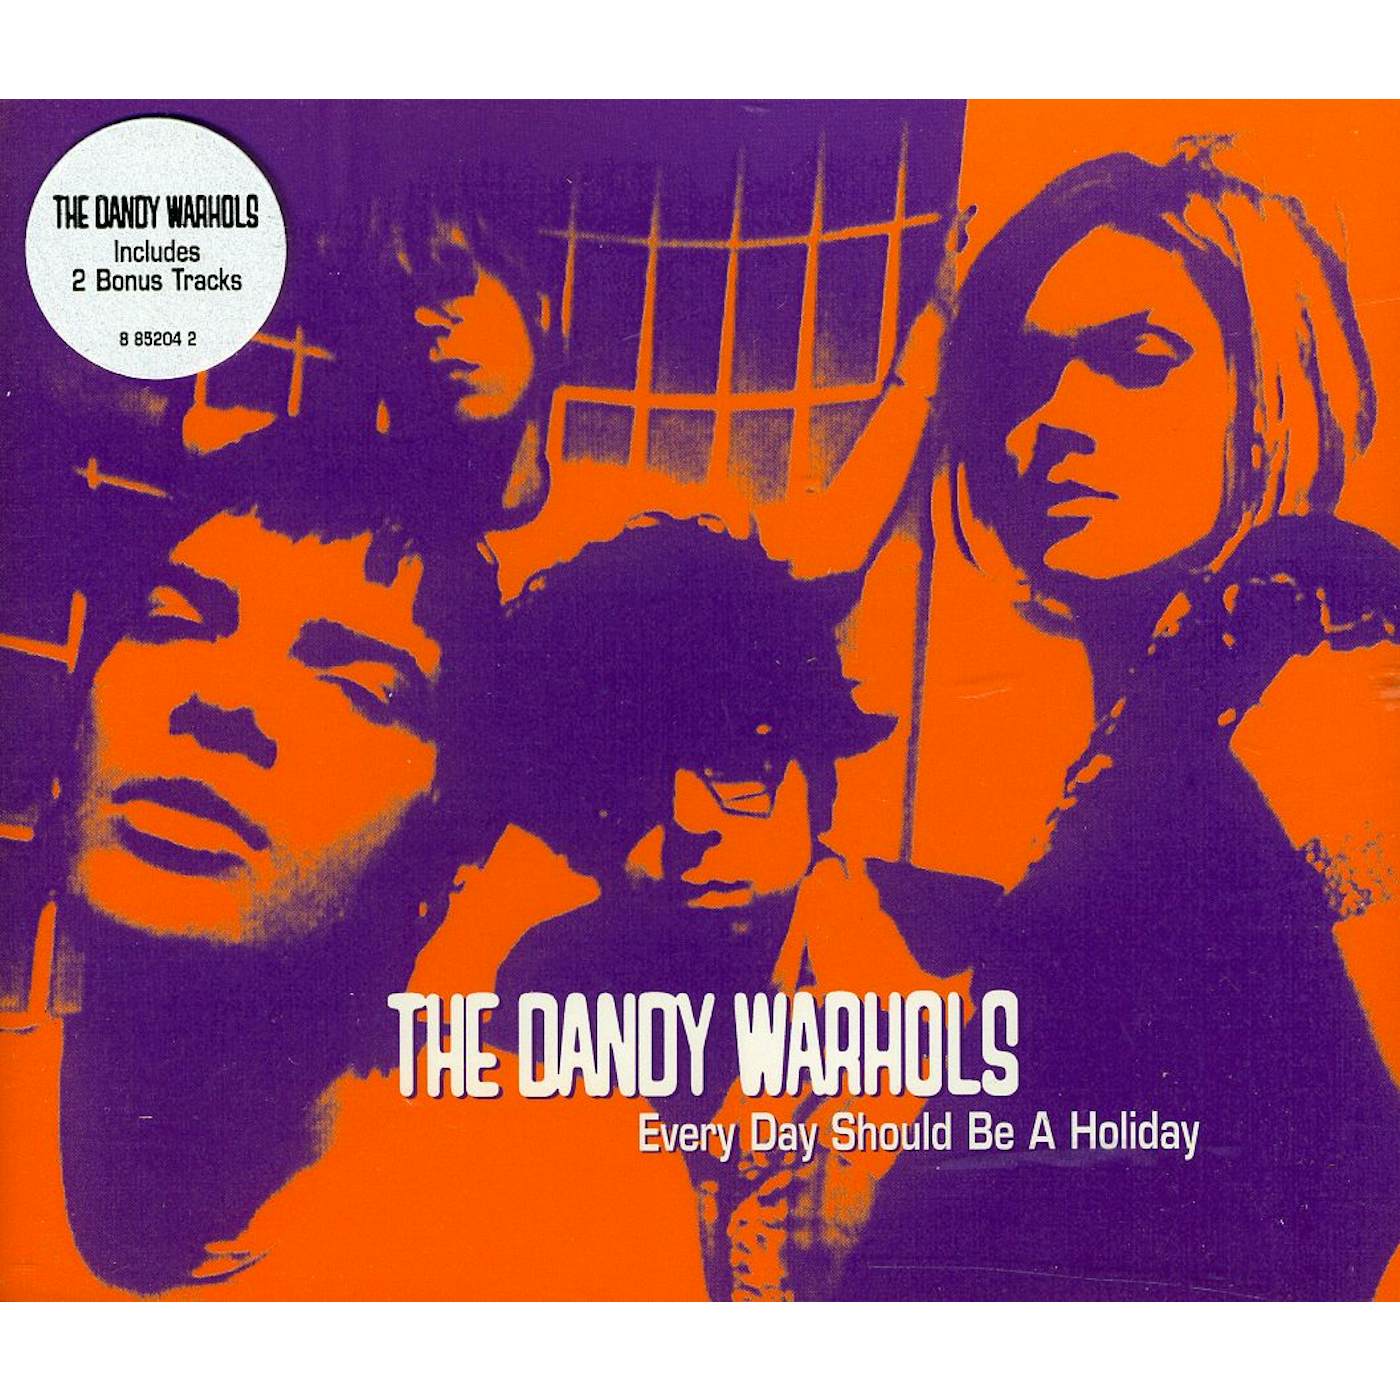 The Dandy Warhols EVERY DAY SHOULD BE A HOLIDAY EP CD